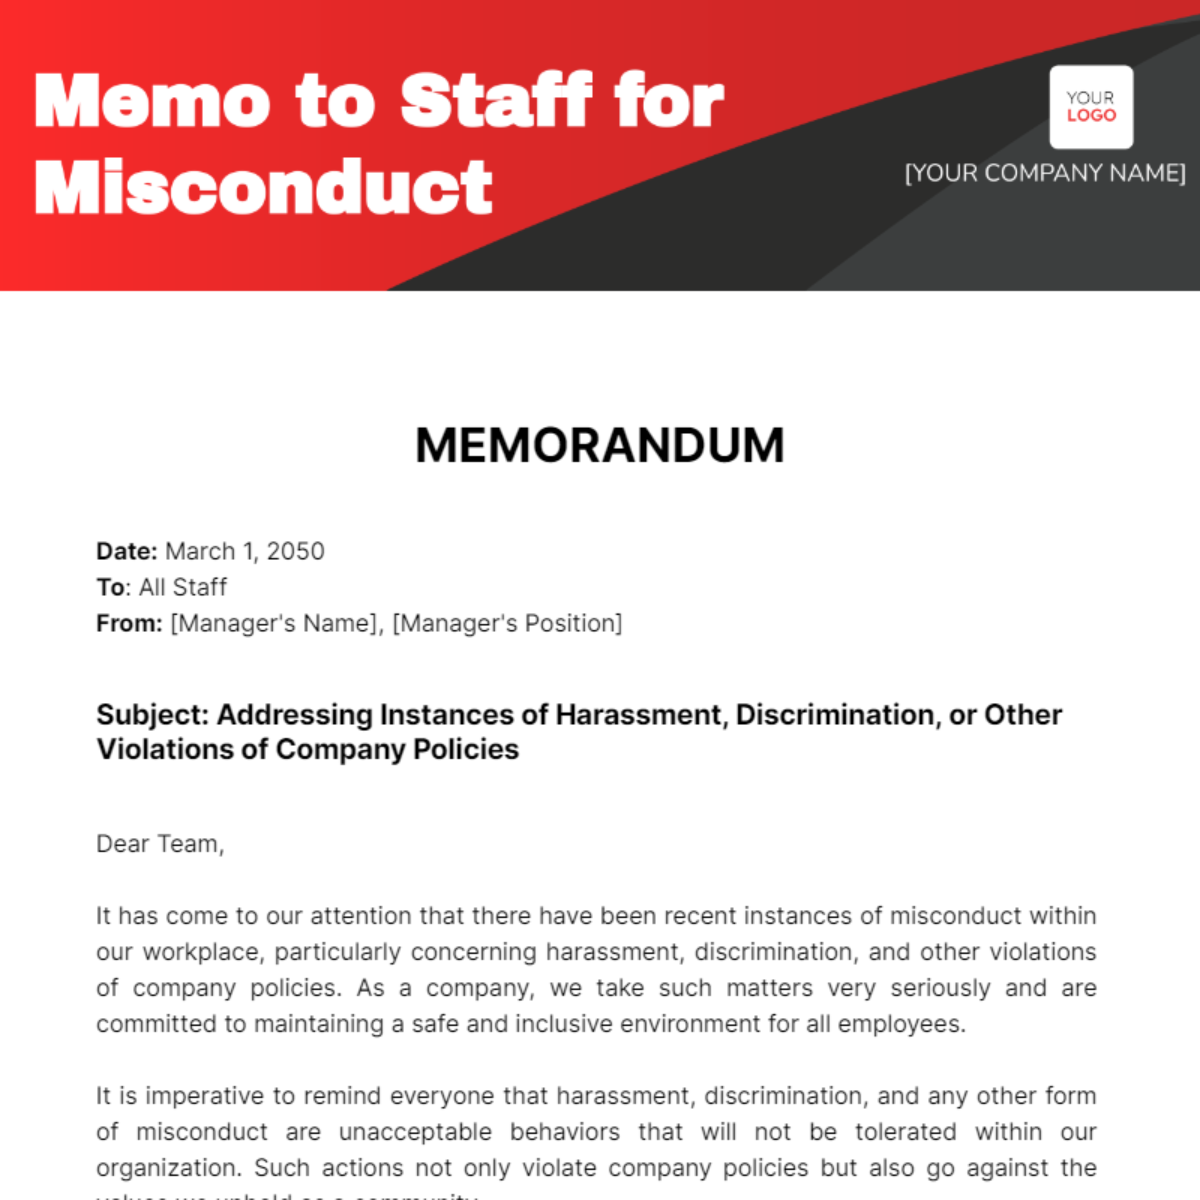 Memo to Staff for Misconduct